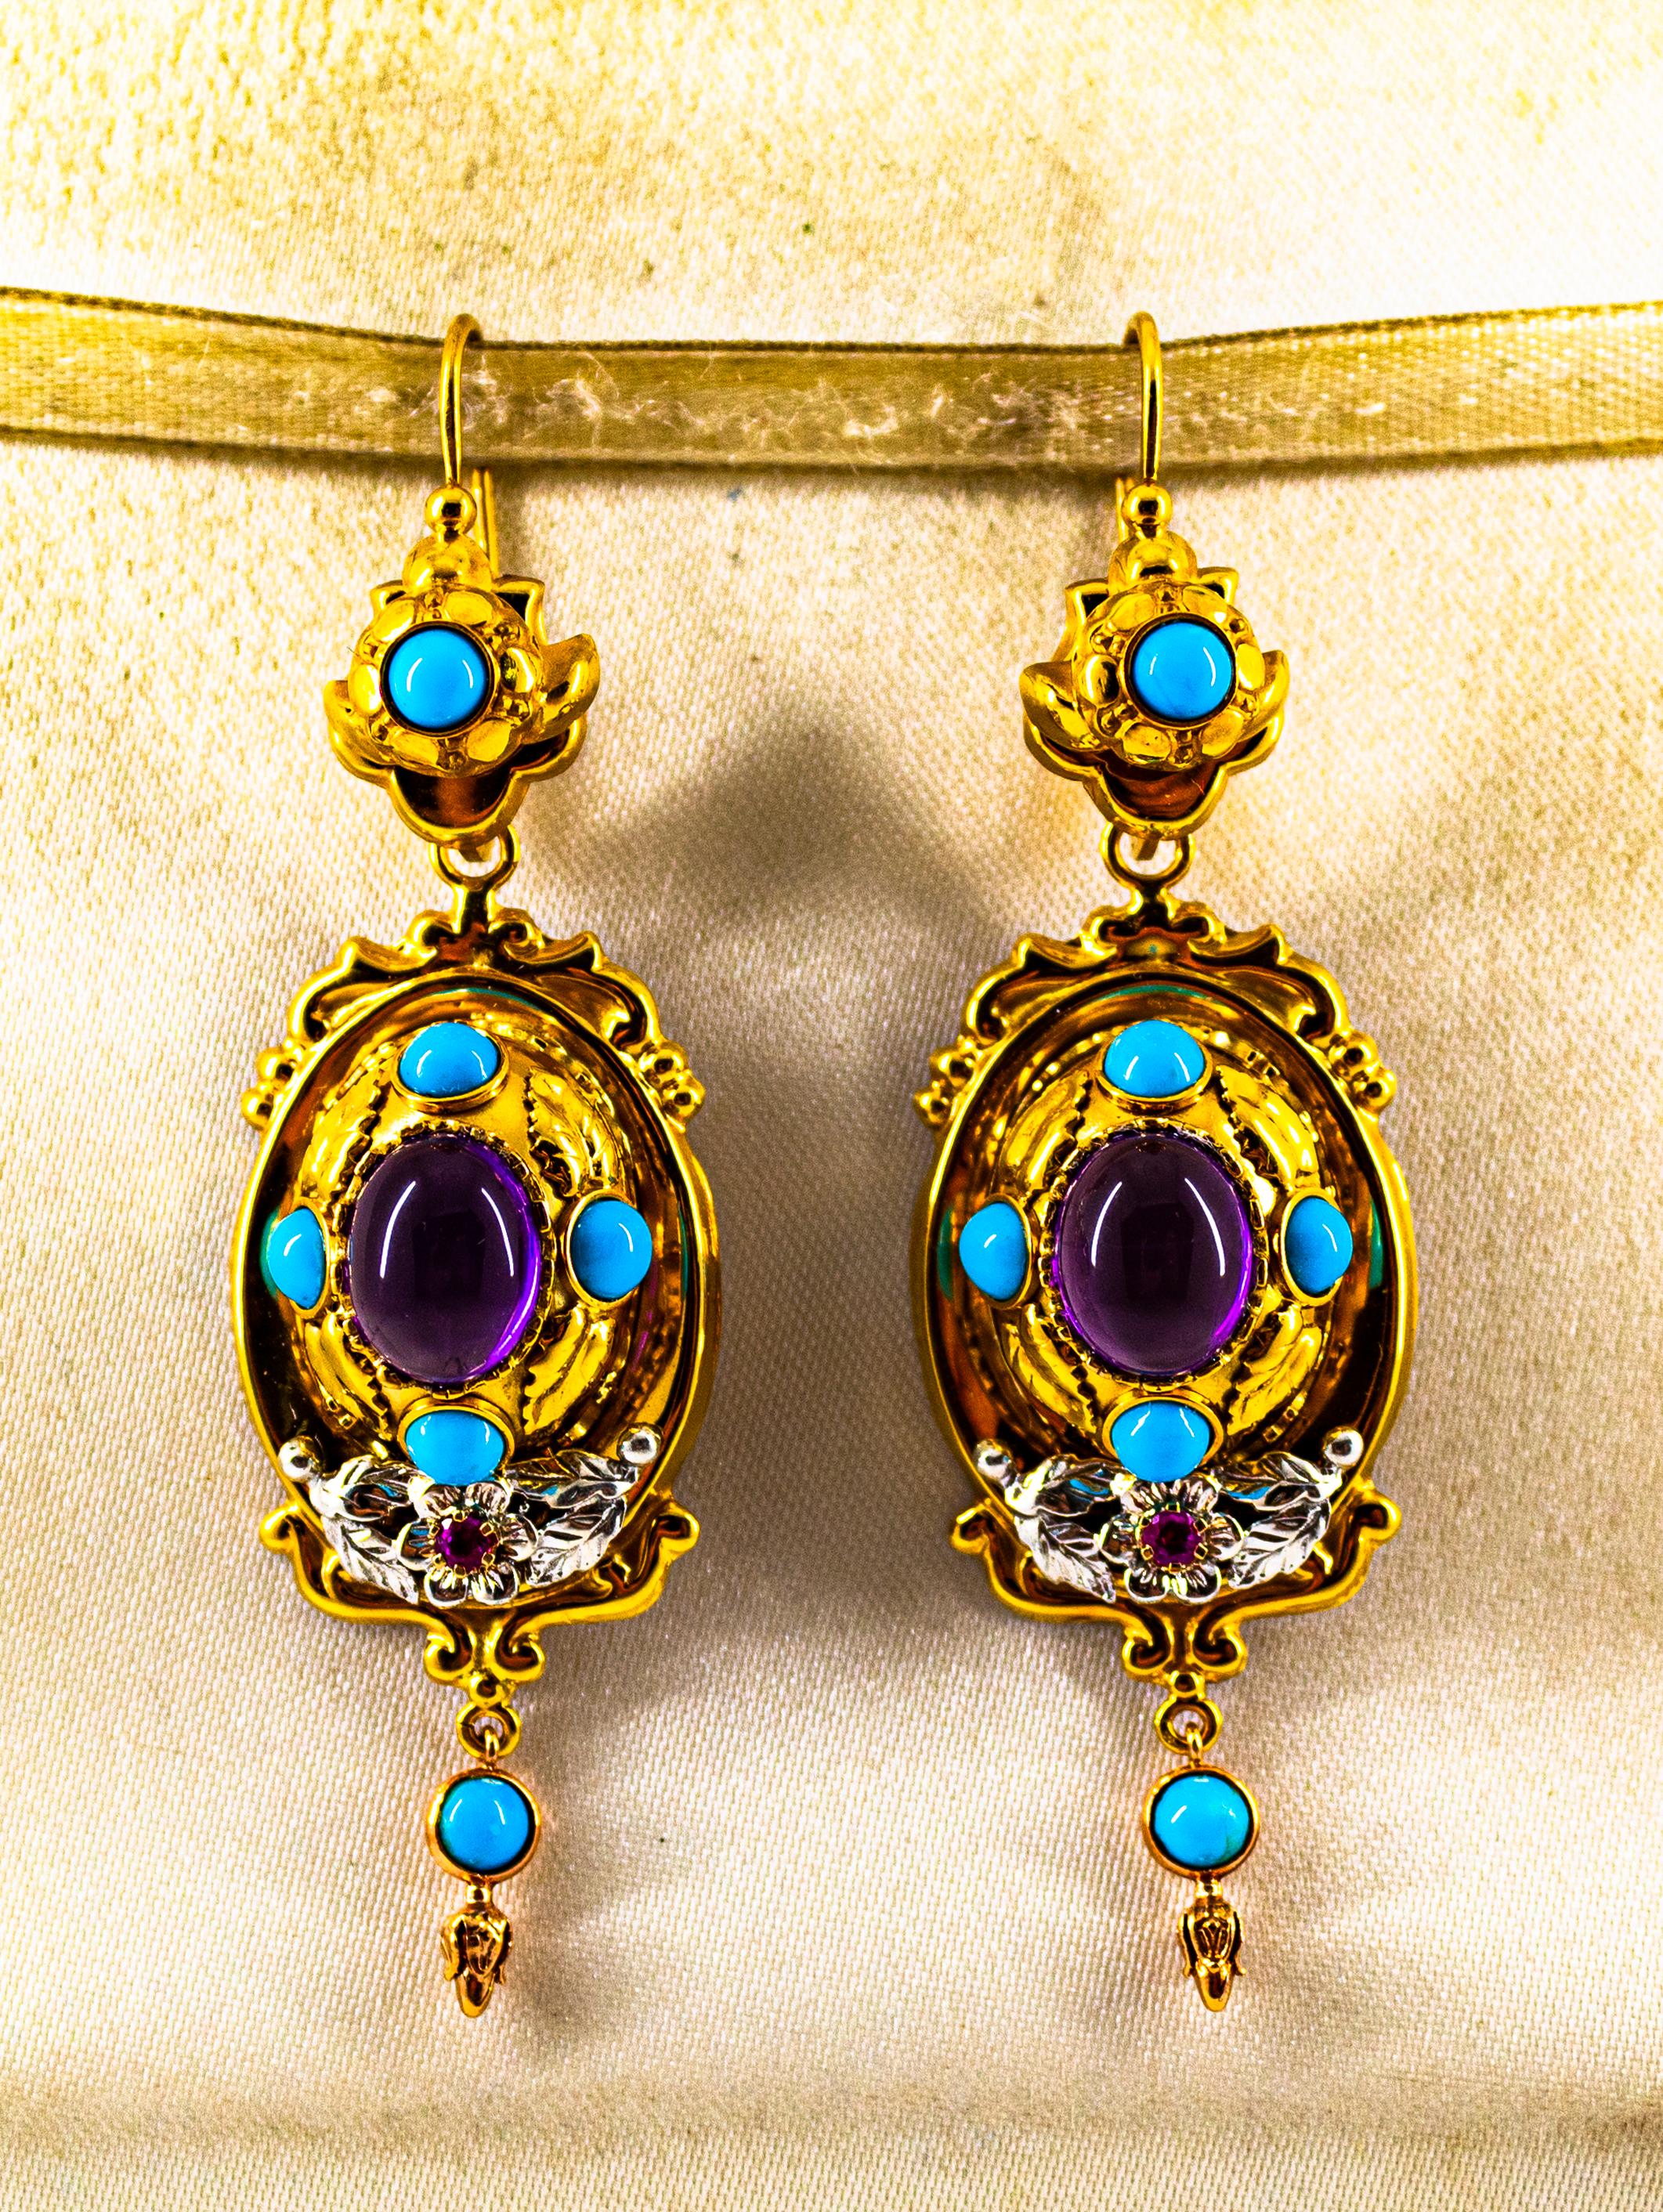 These Earrings are made of 9K Yellow Gold and Sterling Silver.
These Earrings have 0.10 Carats of Rubies.
These Earrings have 5.50 Carats of Cabochon Cut Amethysts.
These Earrings have Natural Turquoise.
These Earrings are inspired by Art Deco.

All